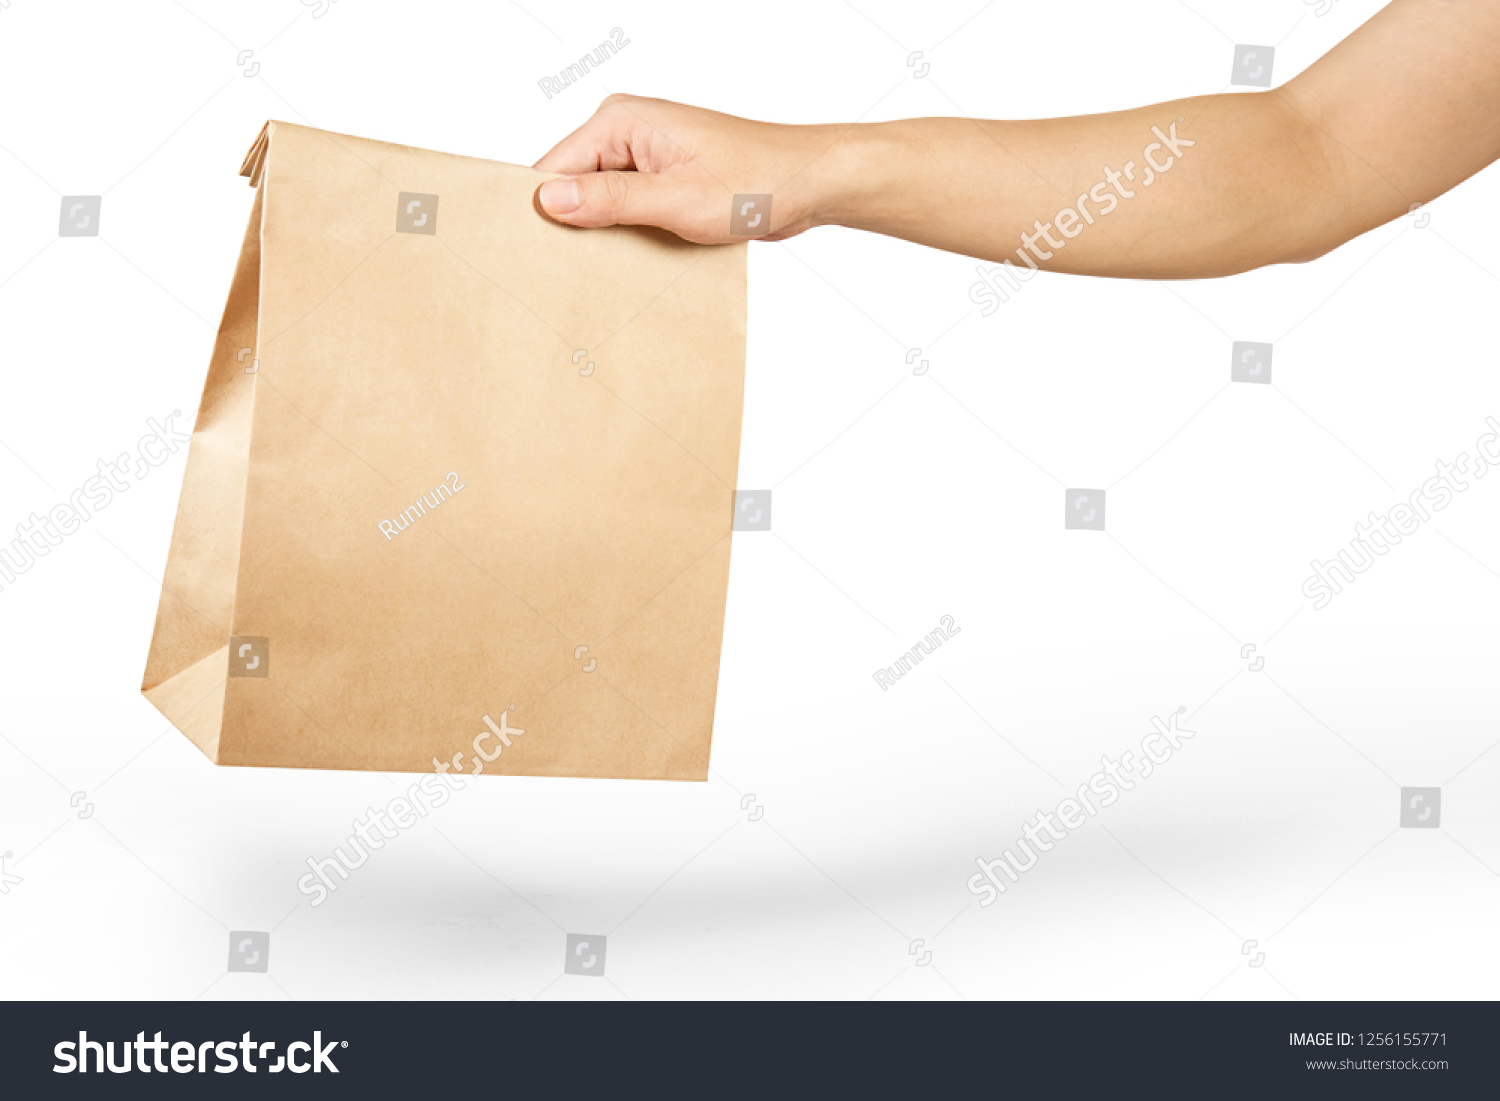 Right hand holidng a brown paper bag isolated on white with clipping path. #1256155771